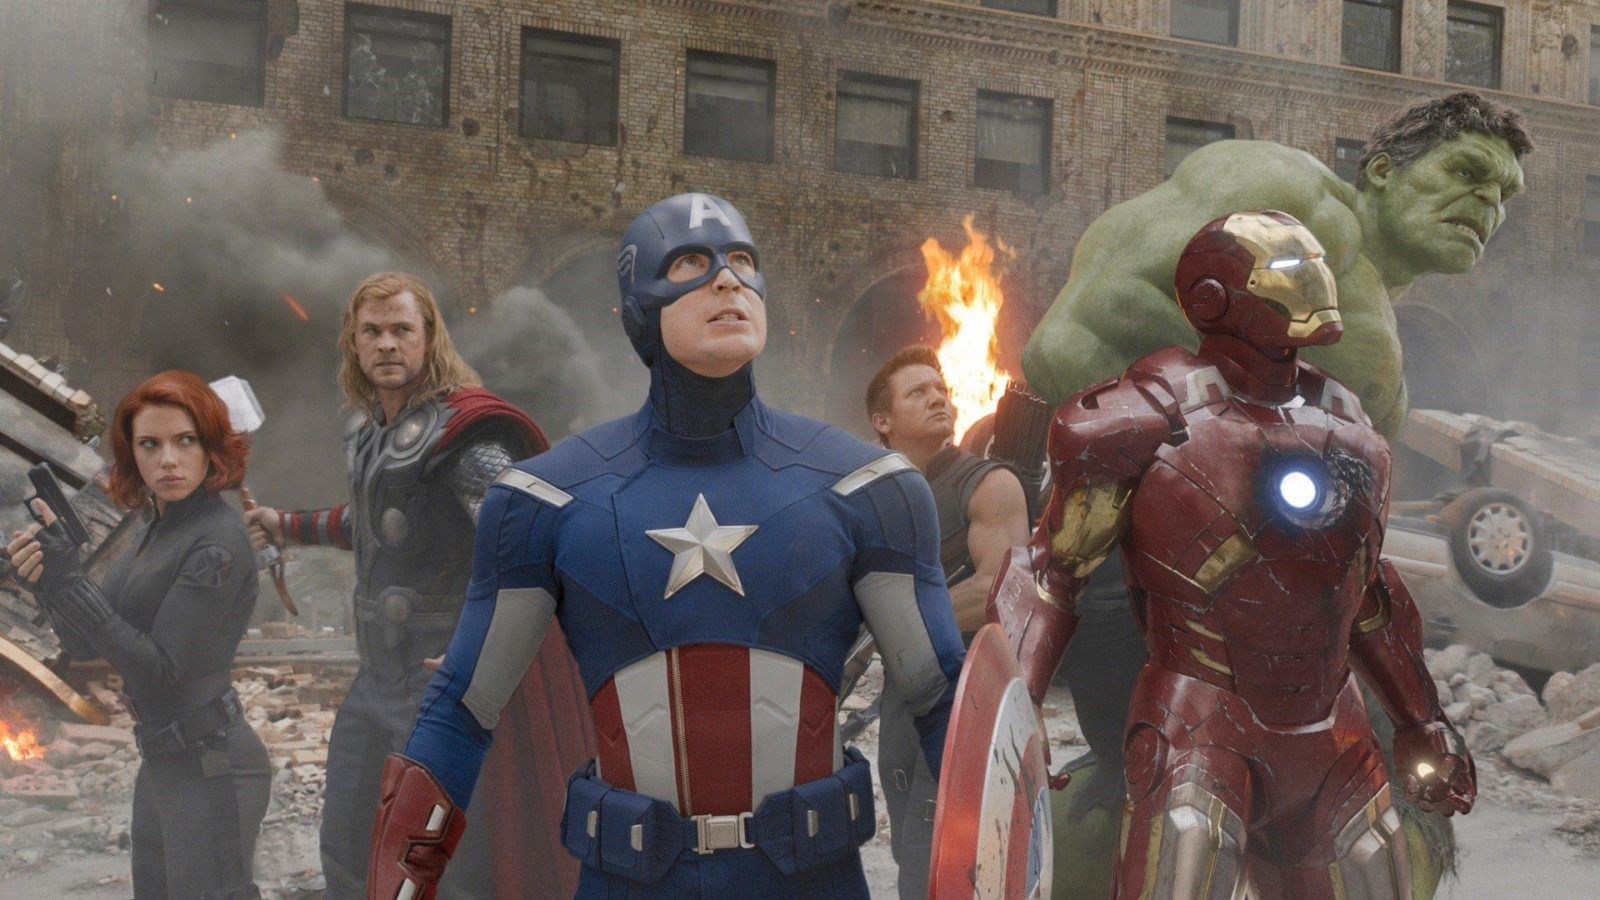 MCU Movies: How to watch the Marvel movies in chronological order